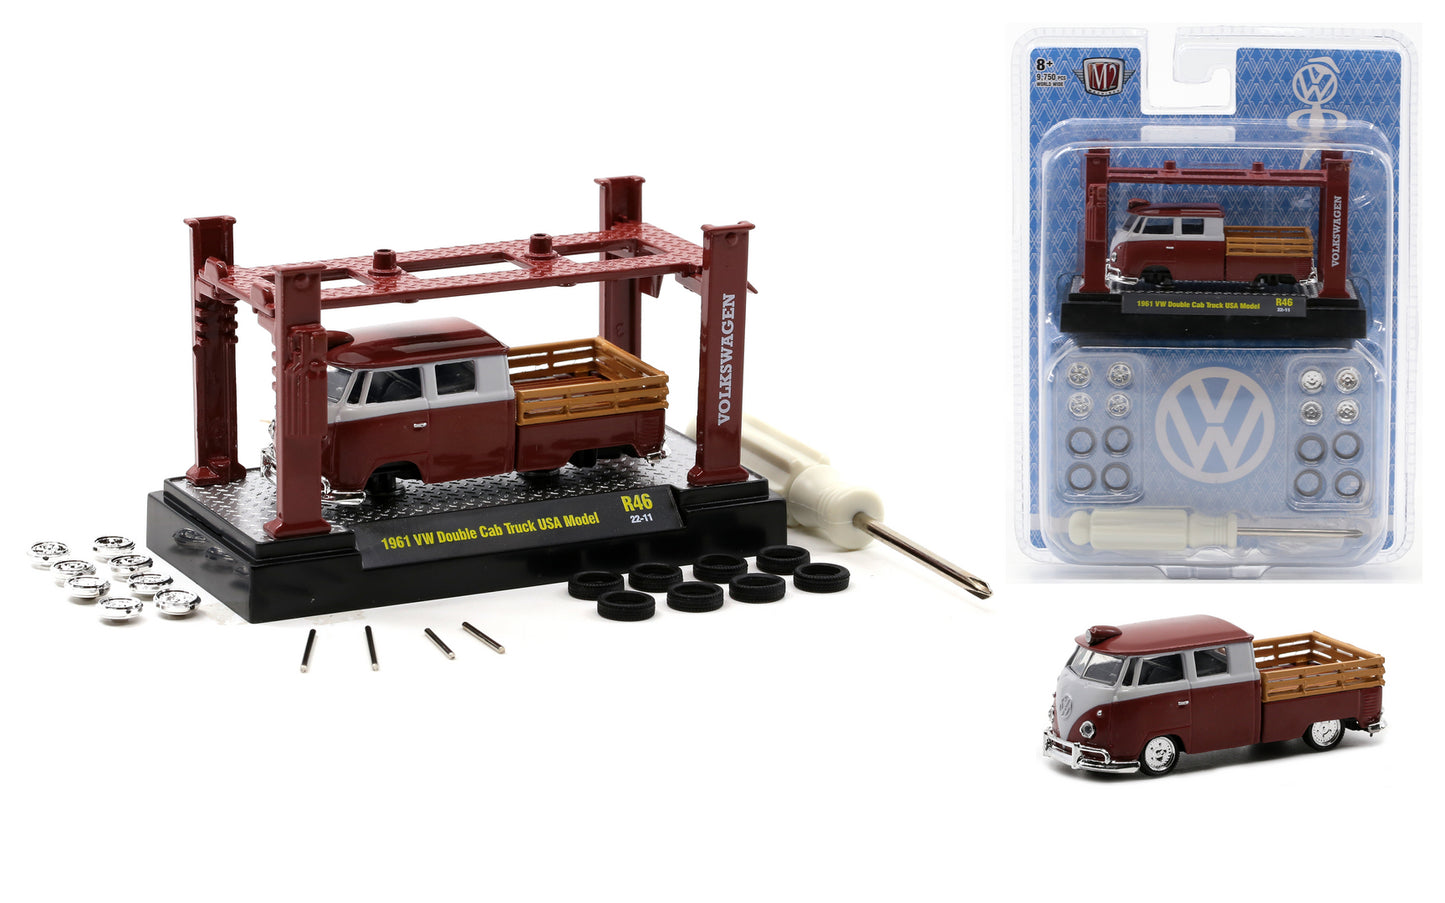 Release 46 - 1961 VW Double Cab Truck USA Model Kits